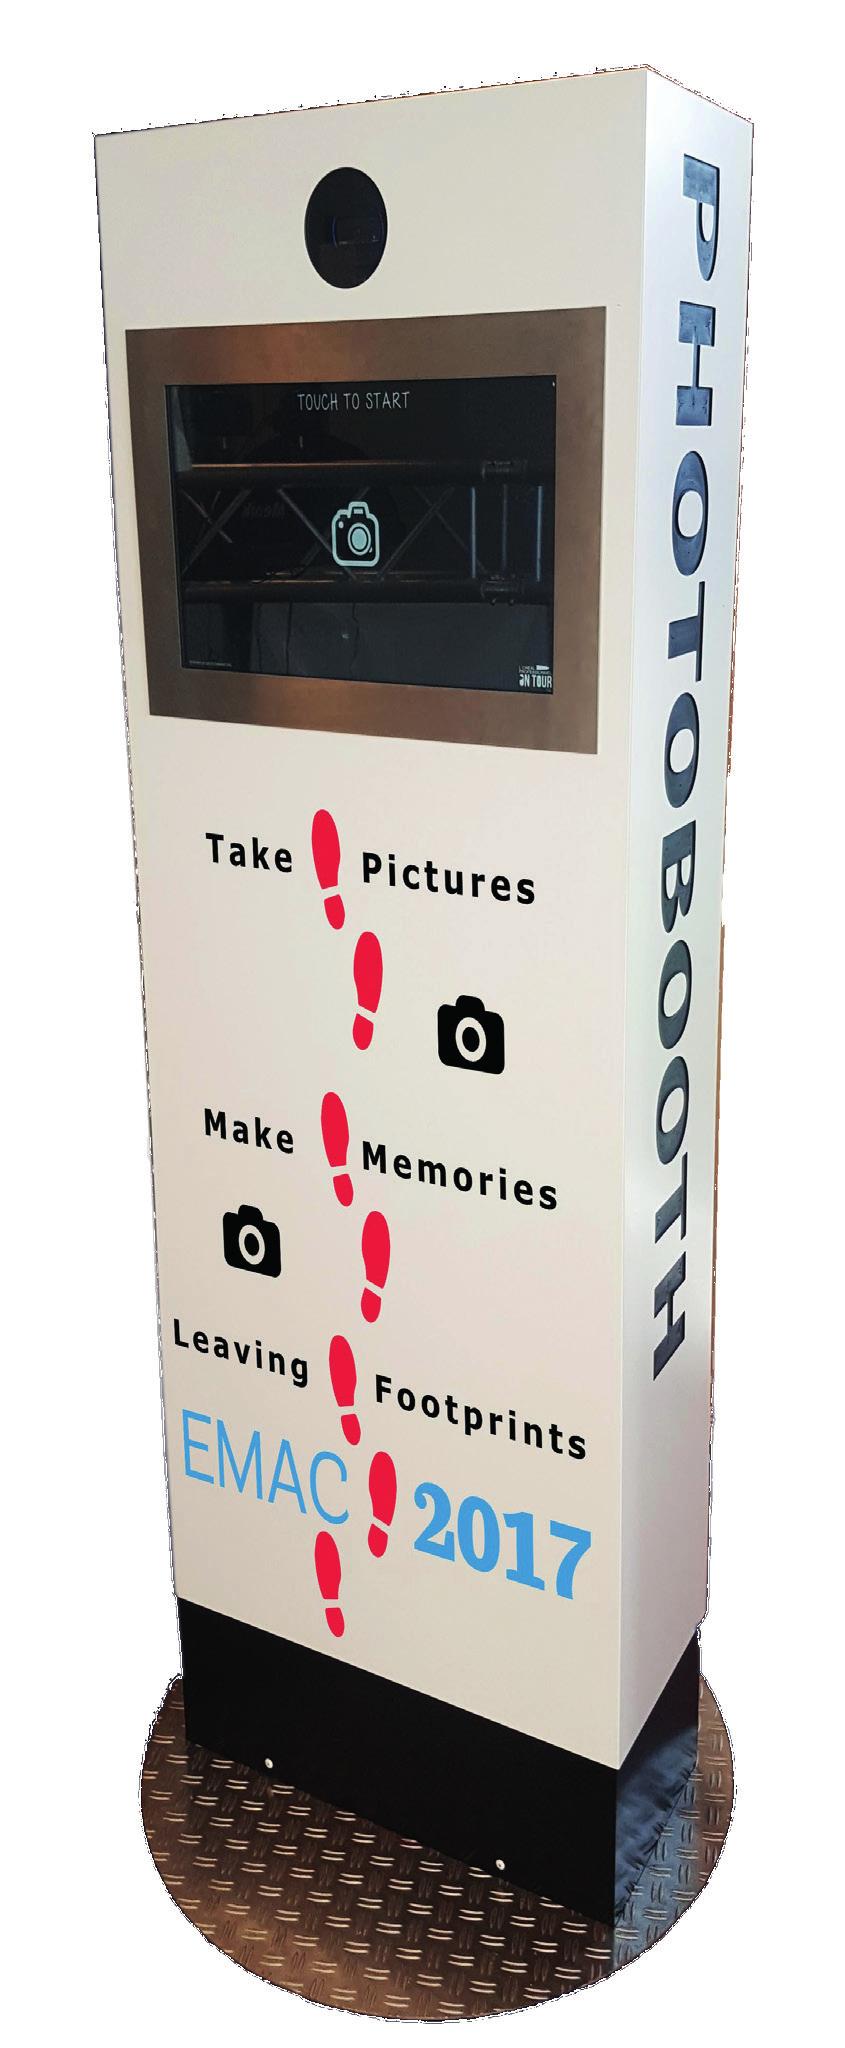 Making memories with our Photobooth At EMAC 2017 you can create a digital memory using our photobooth!